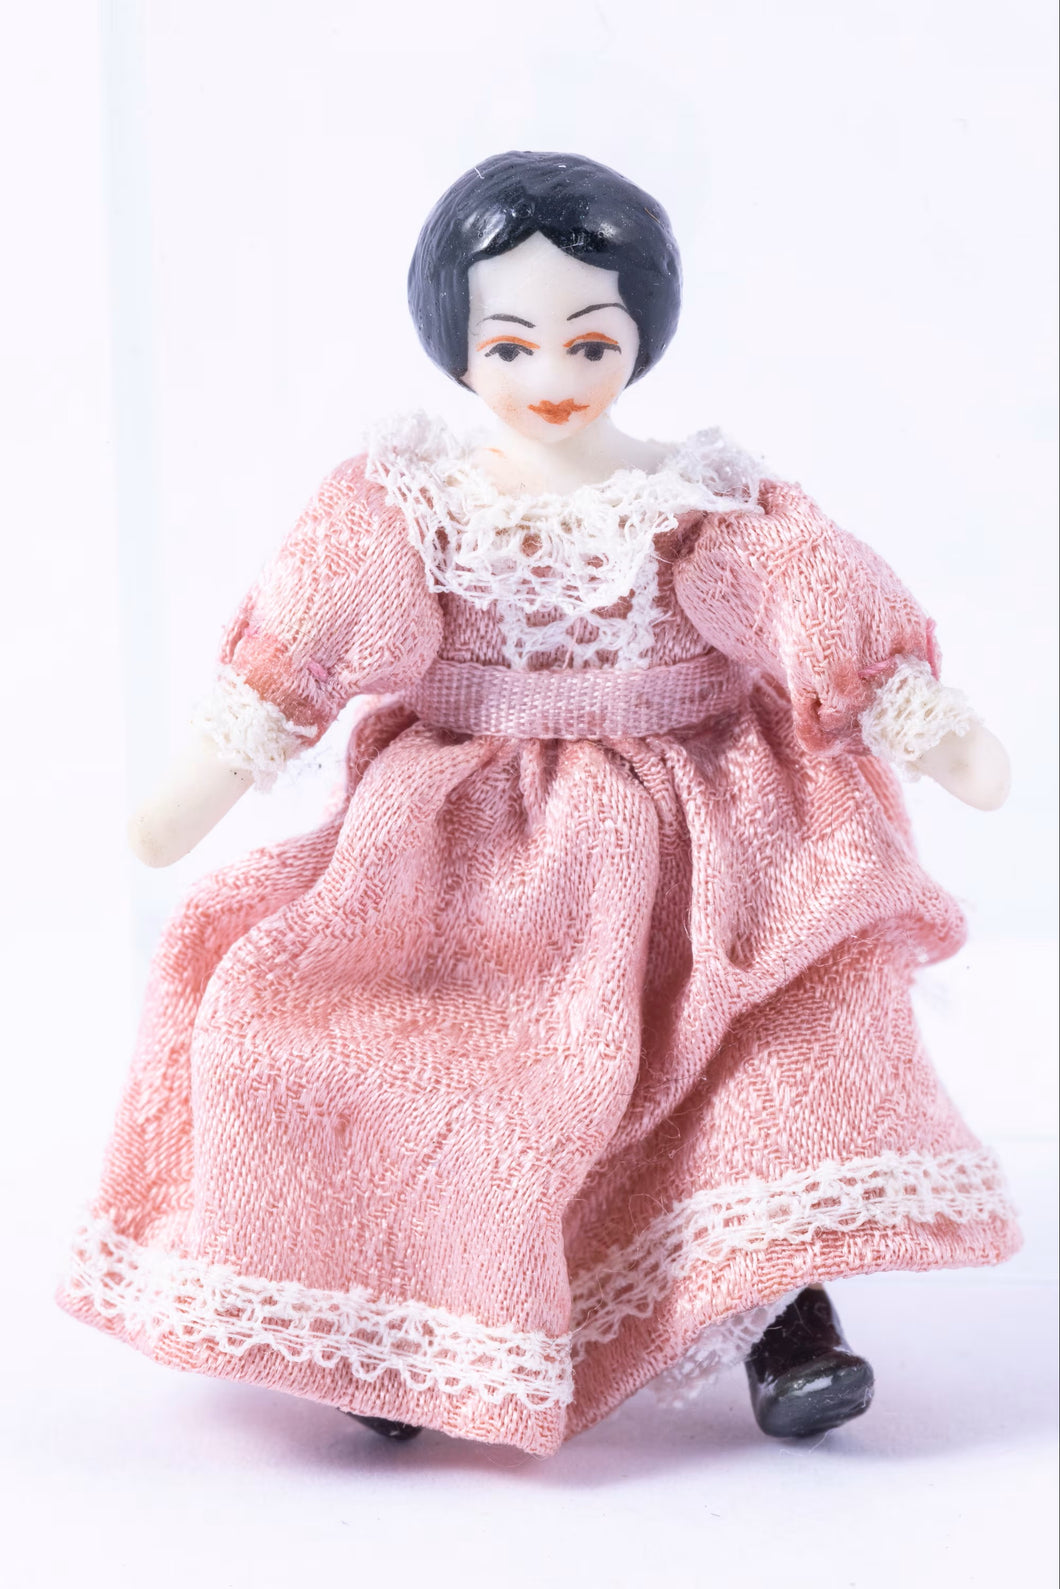 Tiny 1800's China Doll in Pink Dress Only 1 3/4